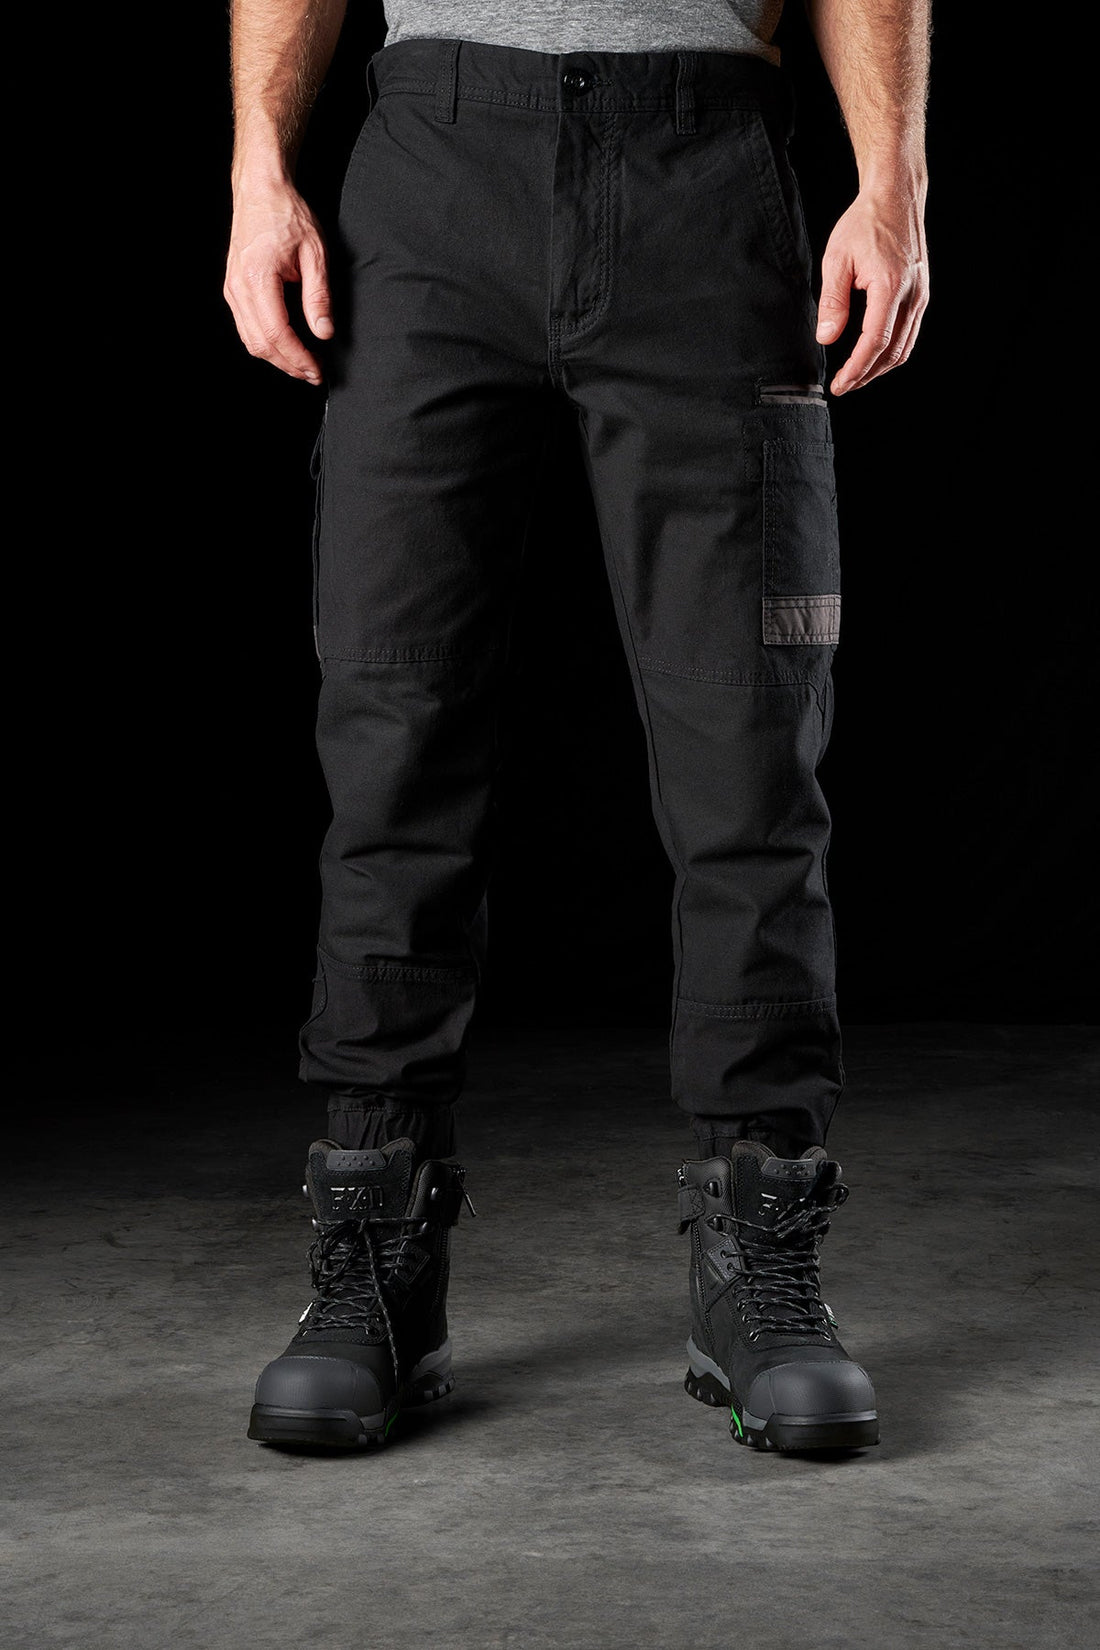 FXD WP-4 Cuffed Work Trousers - BIG Boots UK